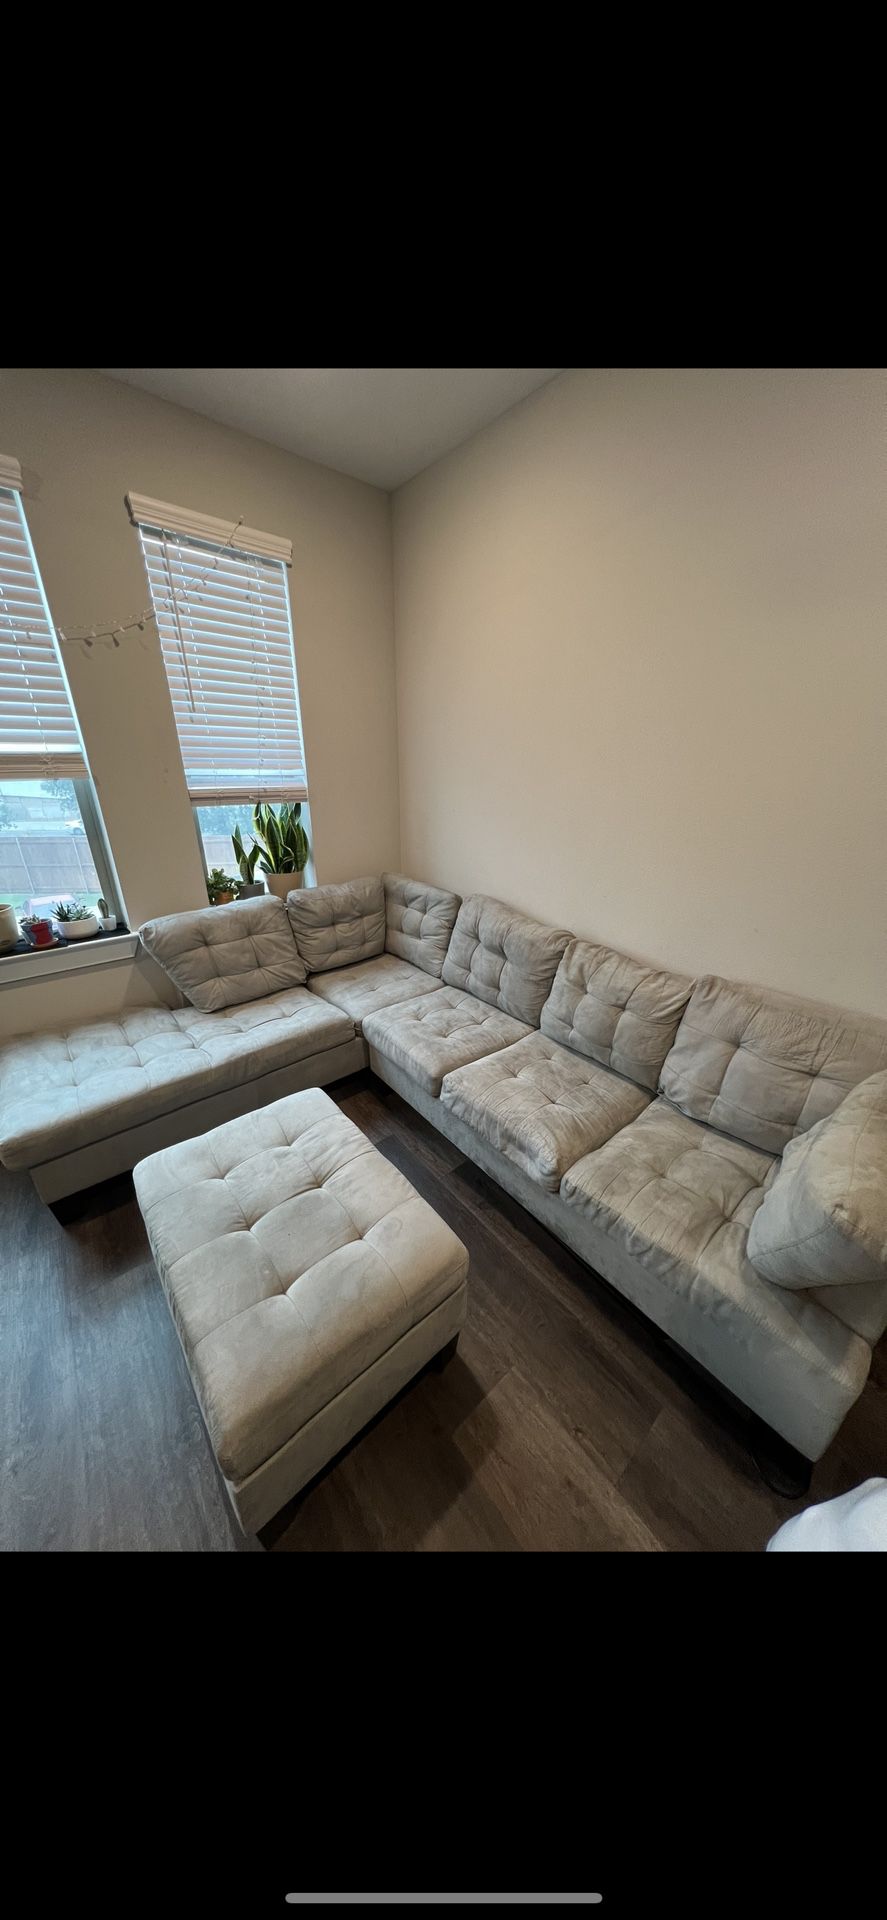 Grey Sectional Couch With Ottoman